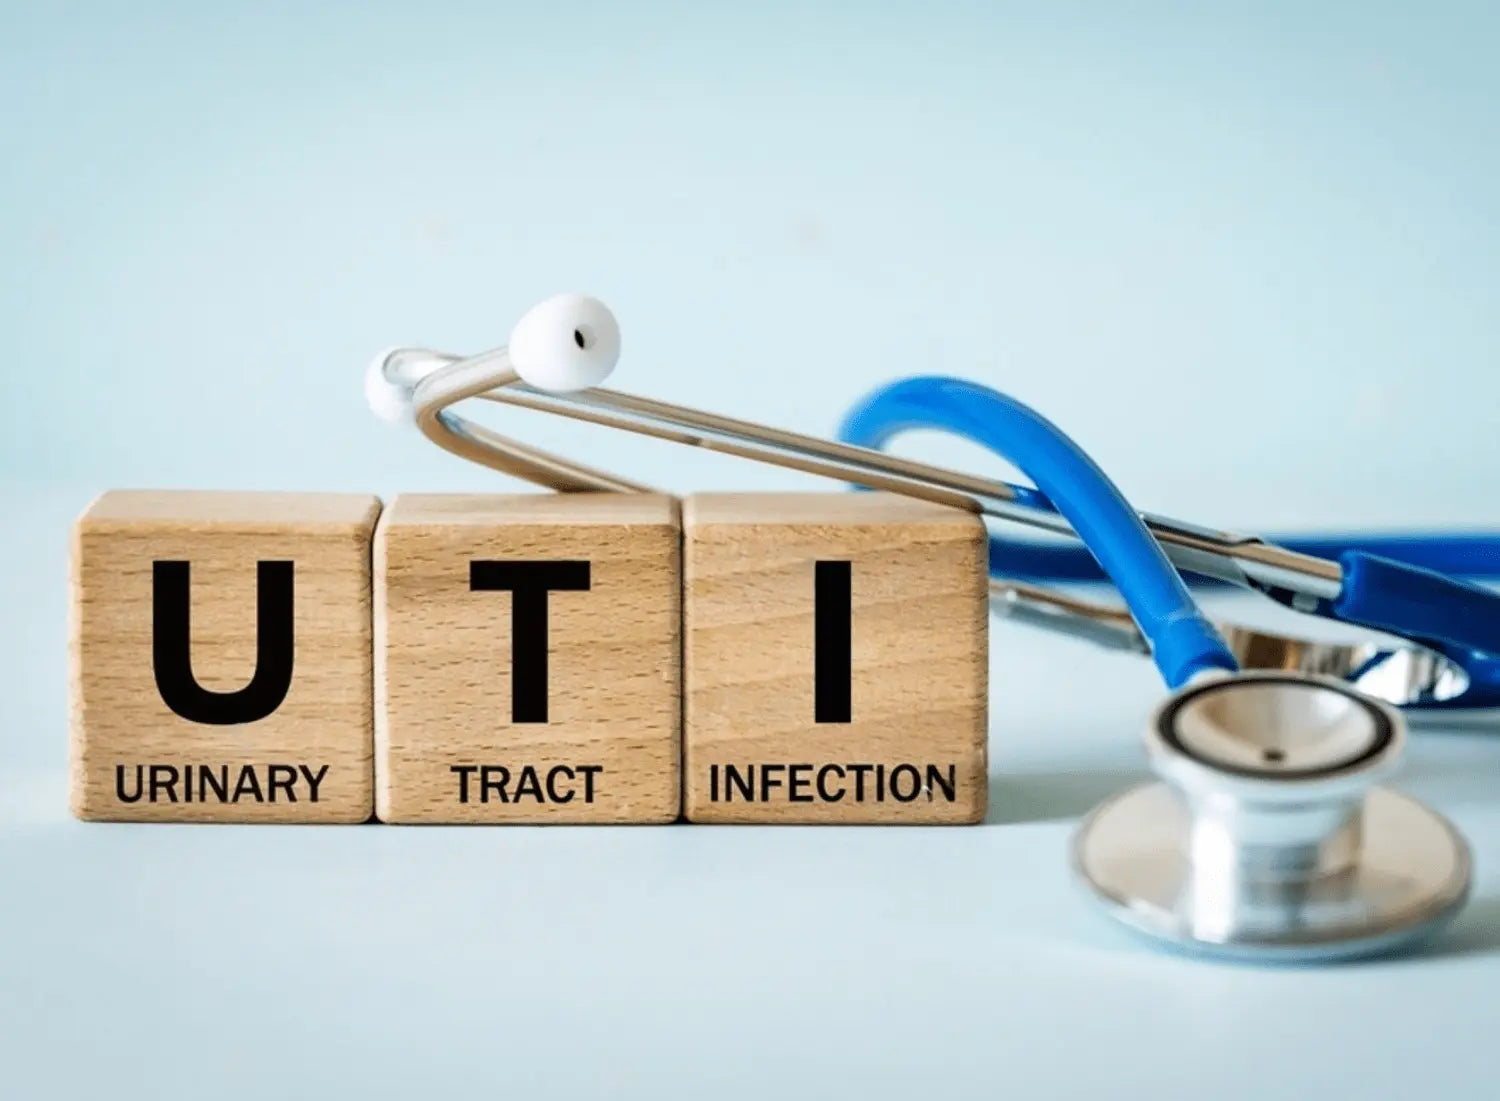 How to Identify the Signs of a Urinary Tract Infection - Underleak